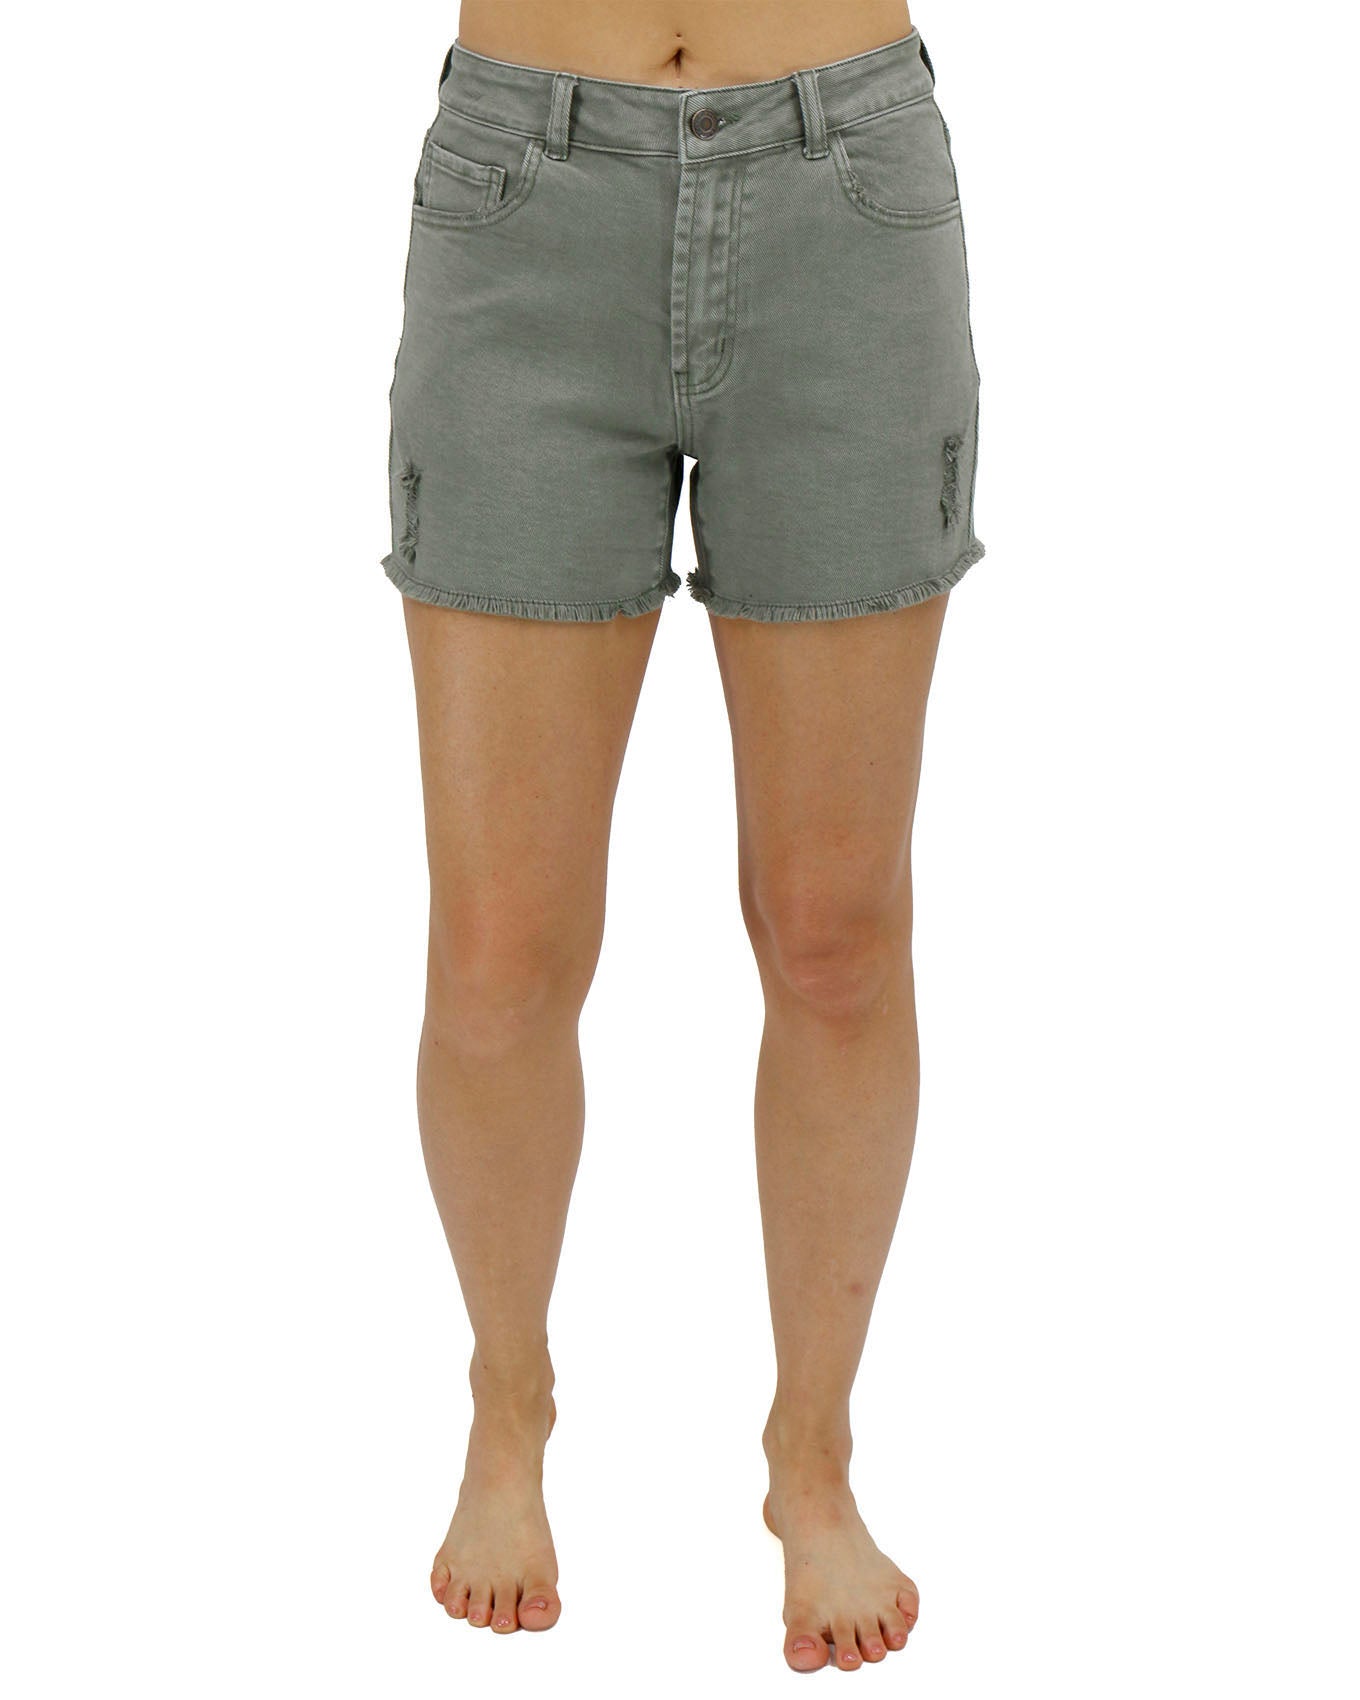 Olive Casual Colored Denim Shorts front detail